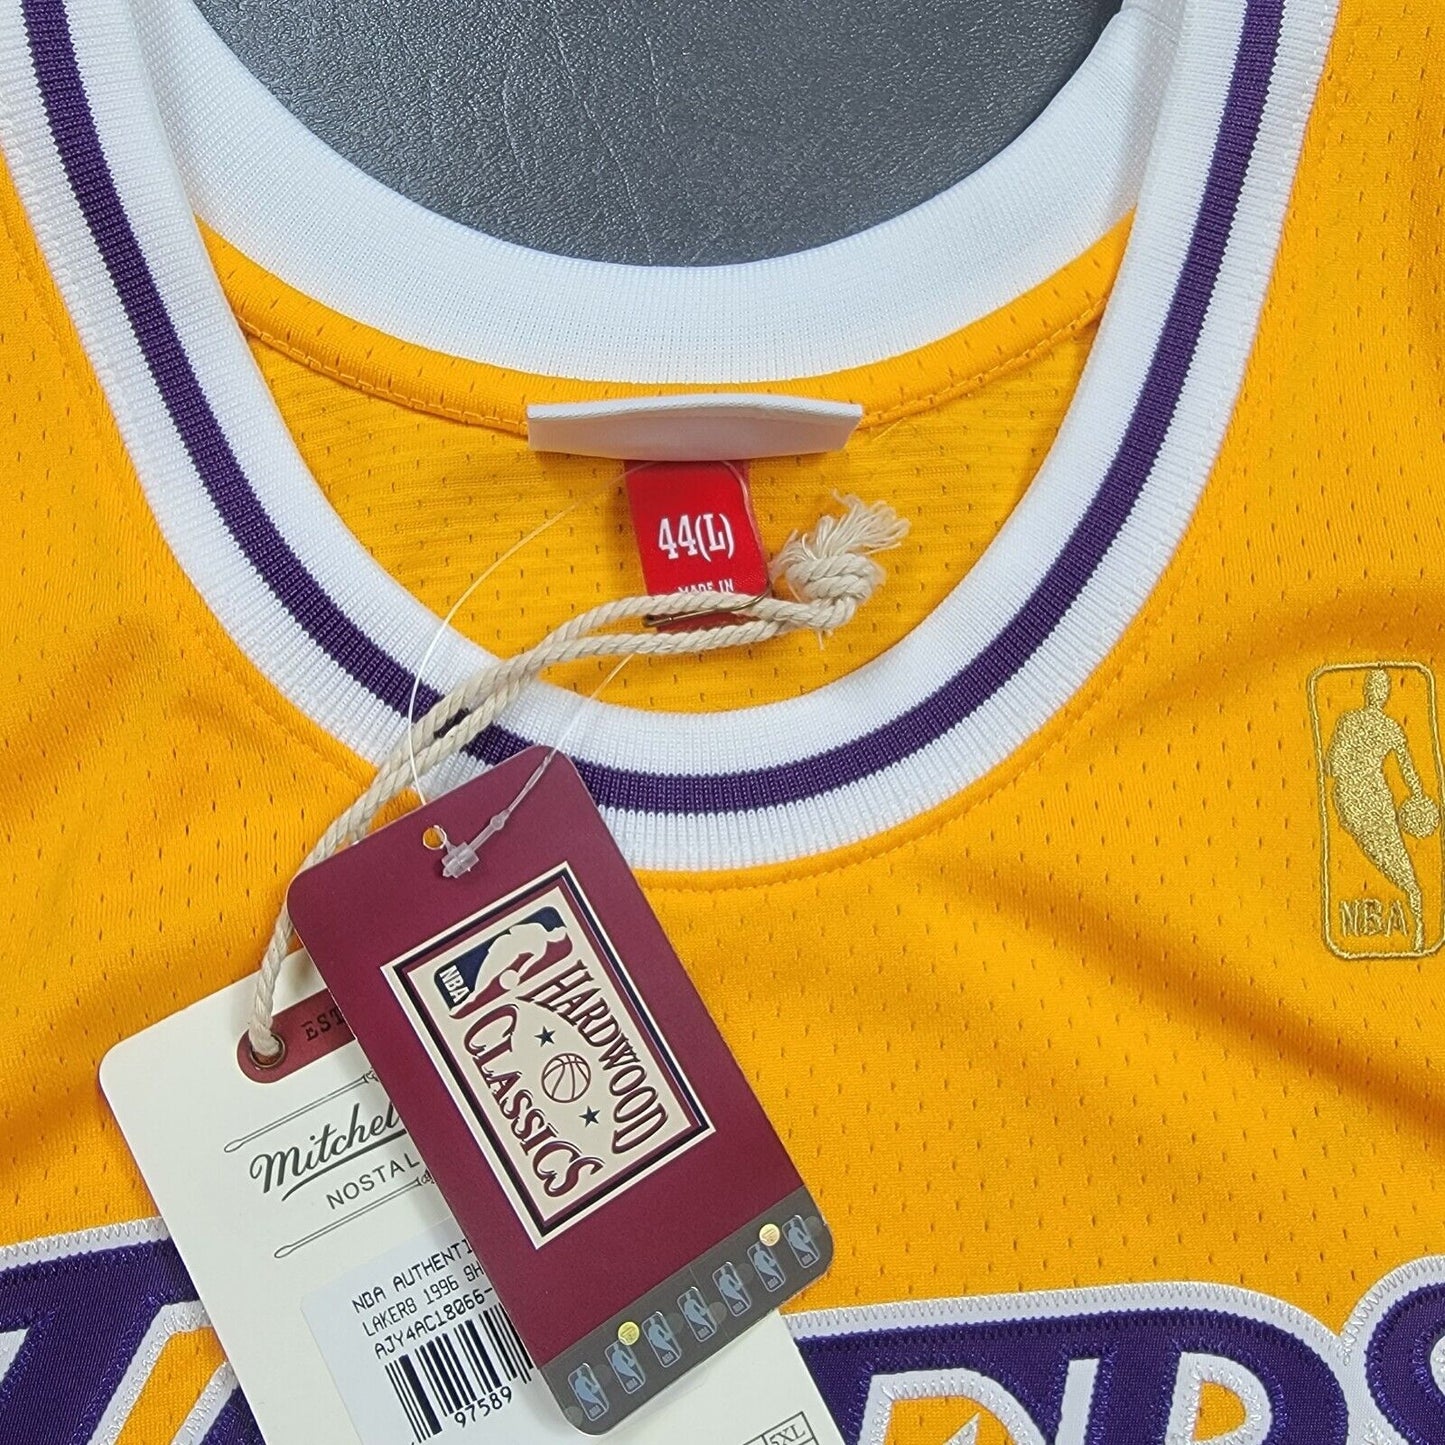 100% Authentic Shaquille O'Neal Mitchell Ness 96 97 Lakers Jersey Size 44 L kobe